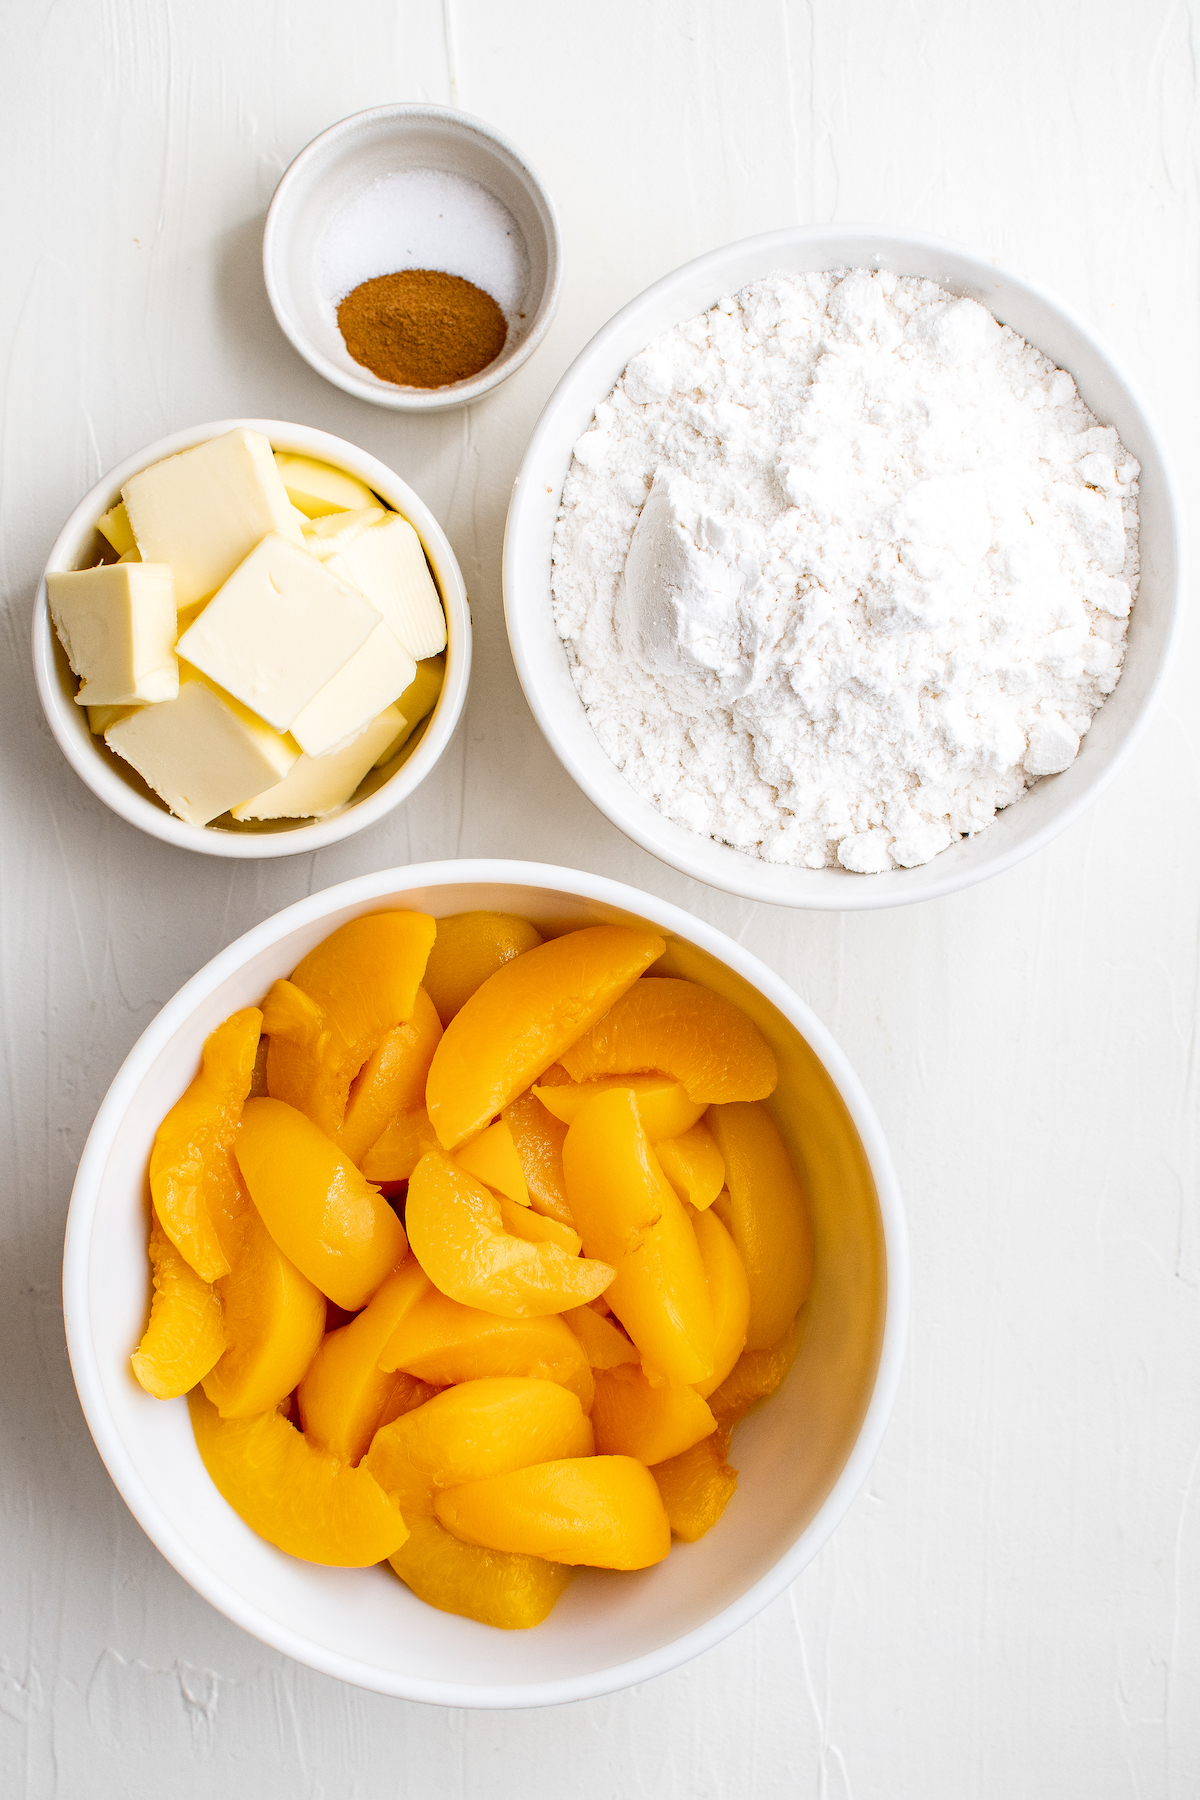 From top: Cinnamon, white cake mix, canned sliced peaches, butter.